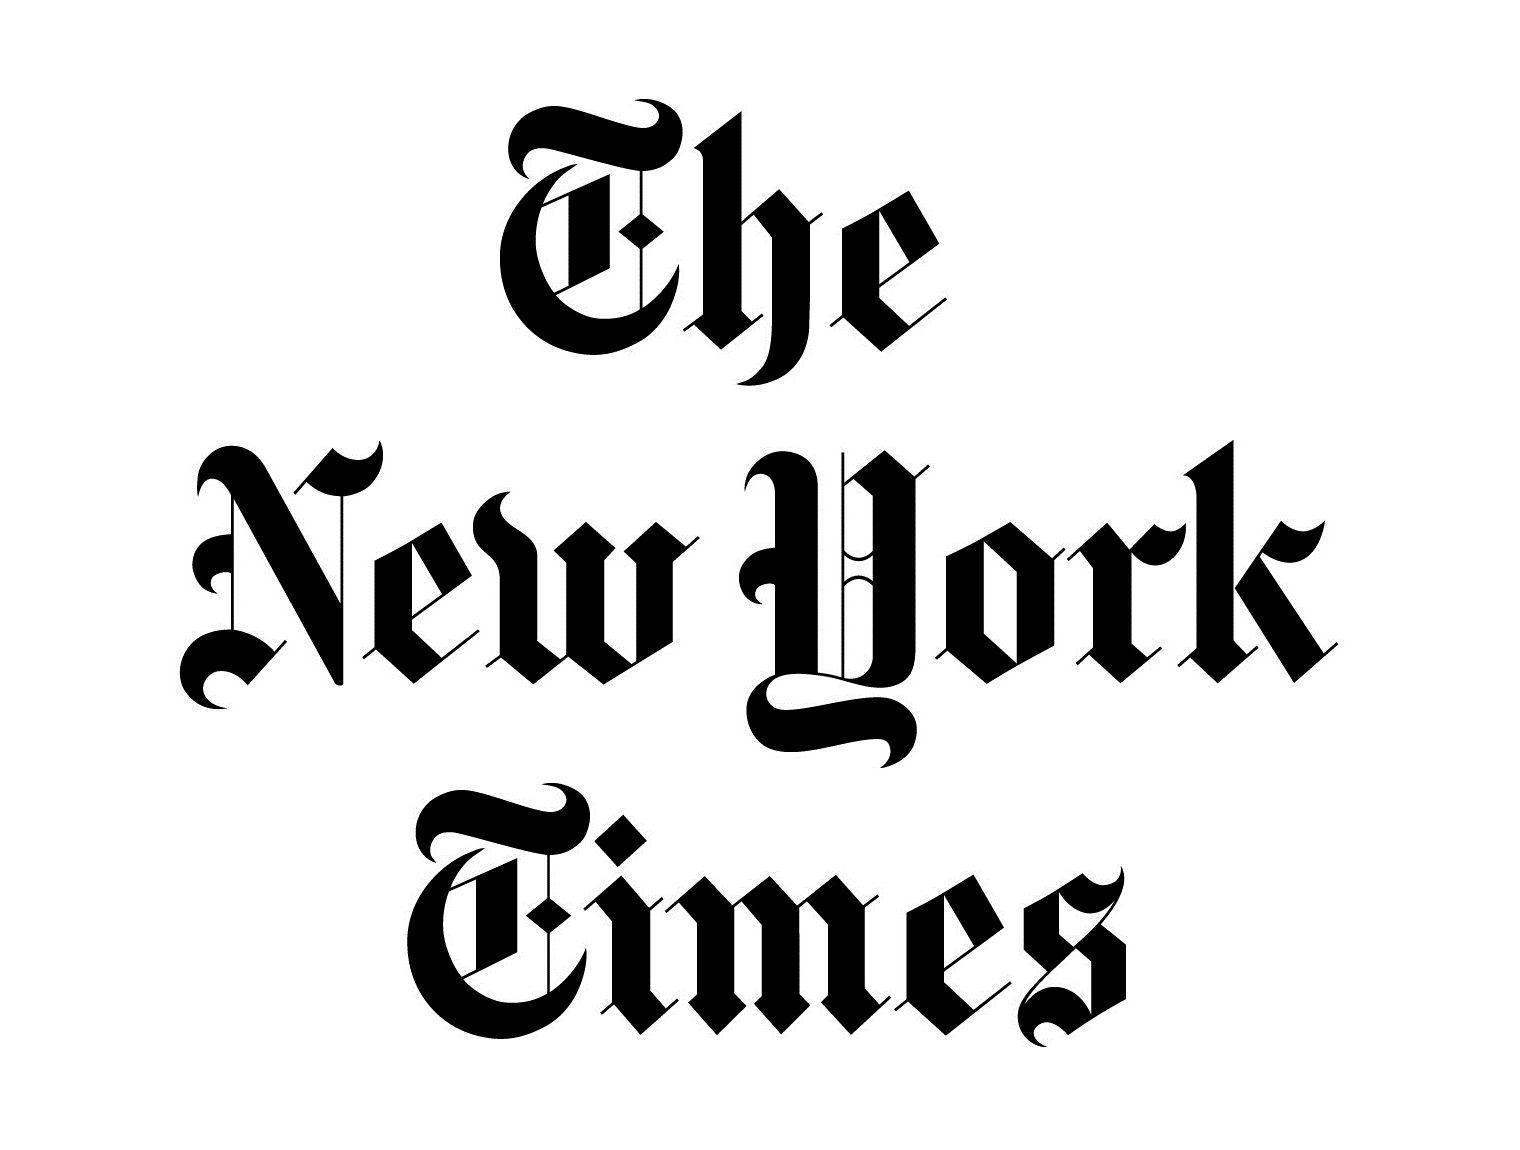 New York Times Logo - New York Times Logo, New York Times Symbol, Meaning, History and ...